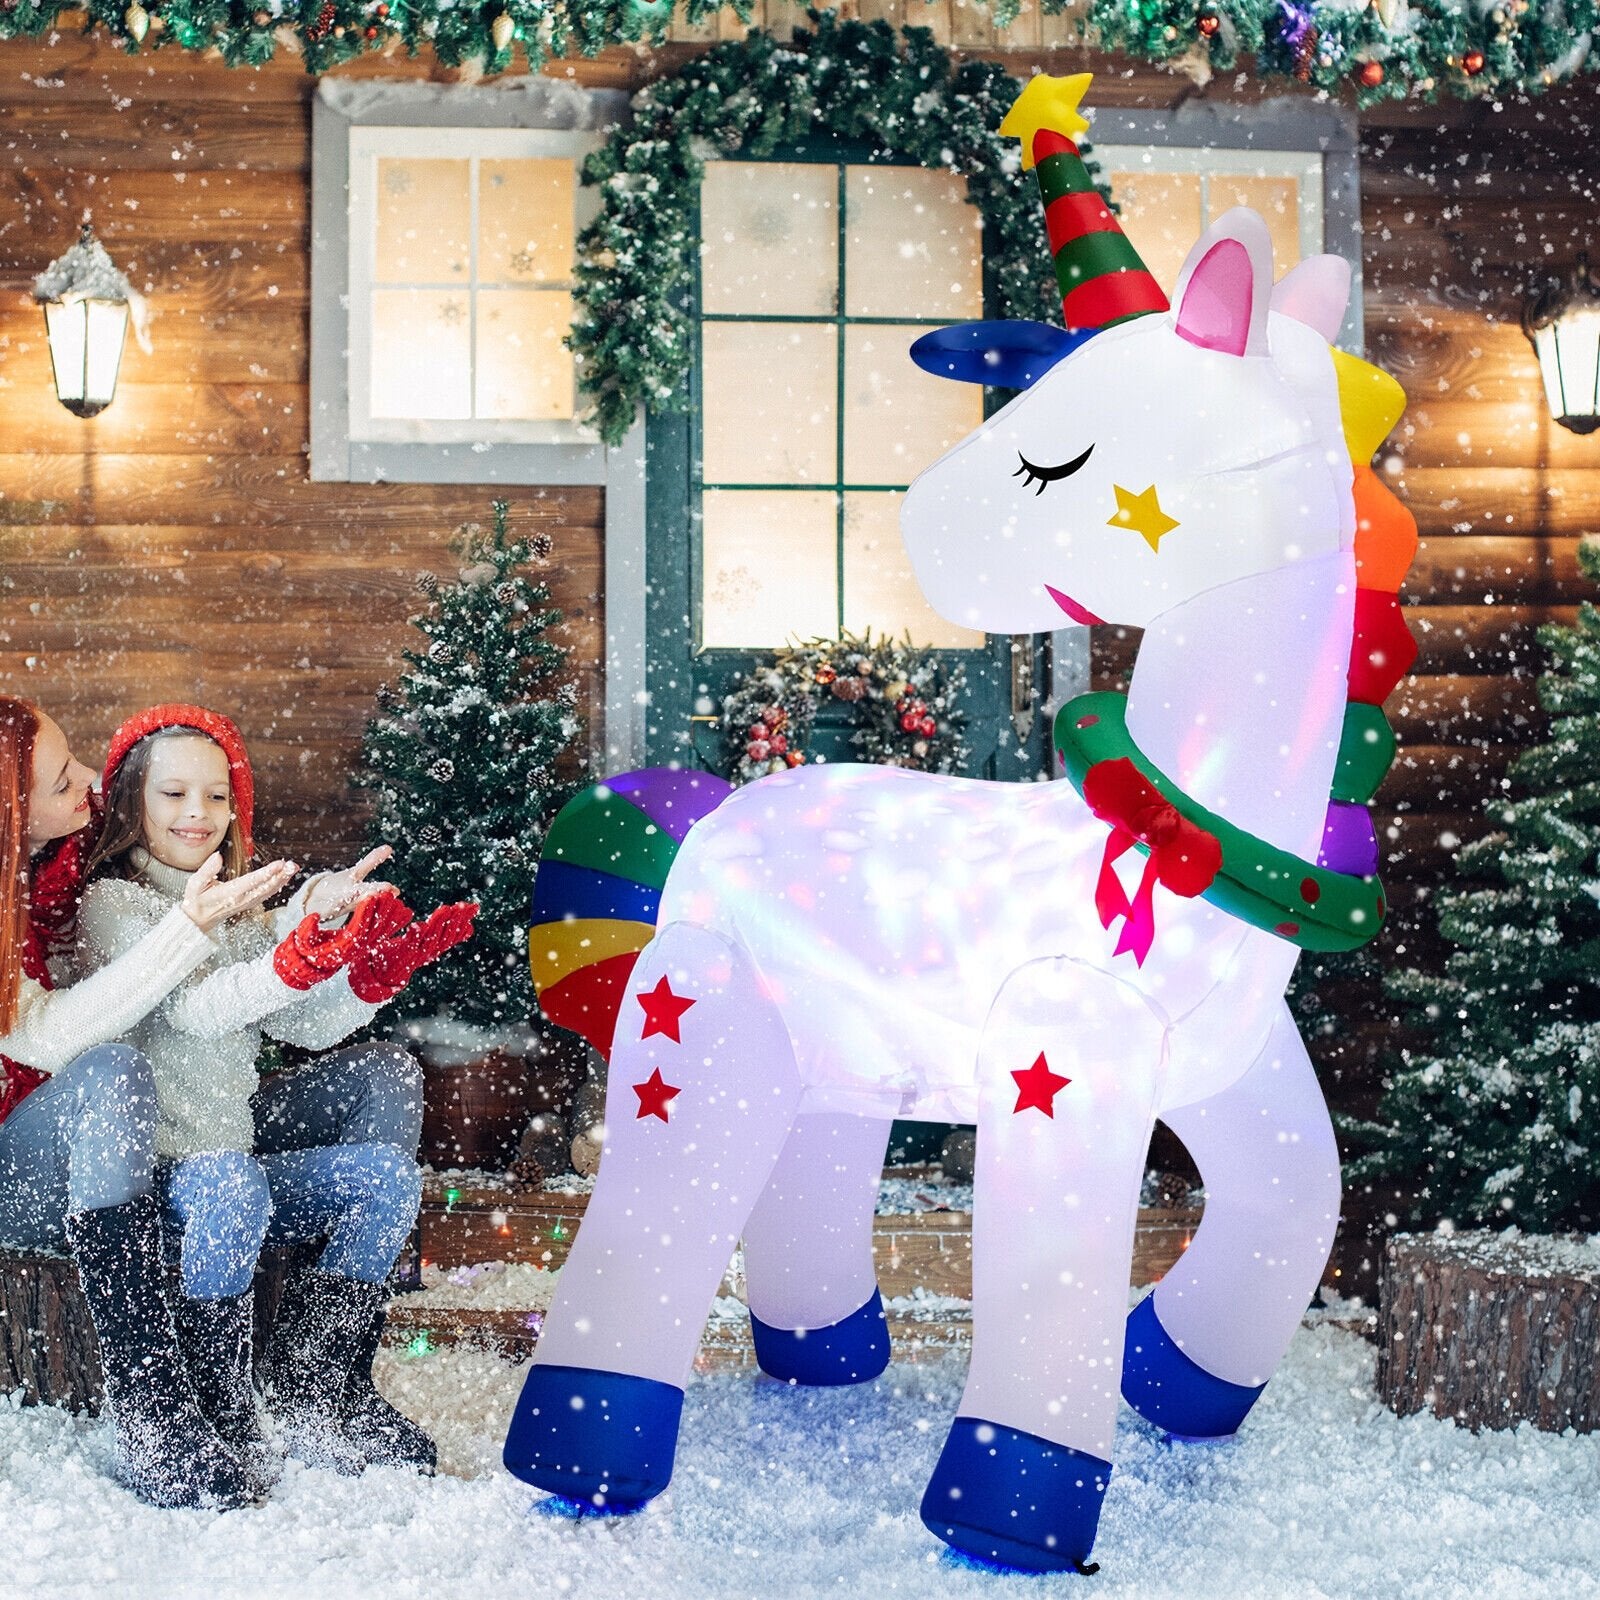 6 Feet Inflatable Unicorn Decoration with Rainbow, Multicolor - Gallery Canada